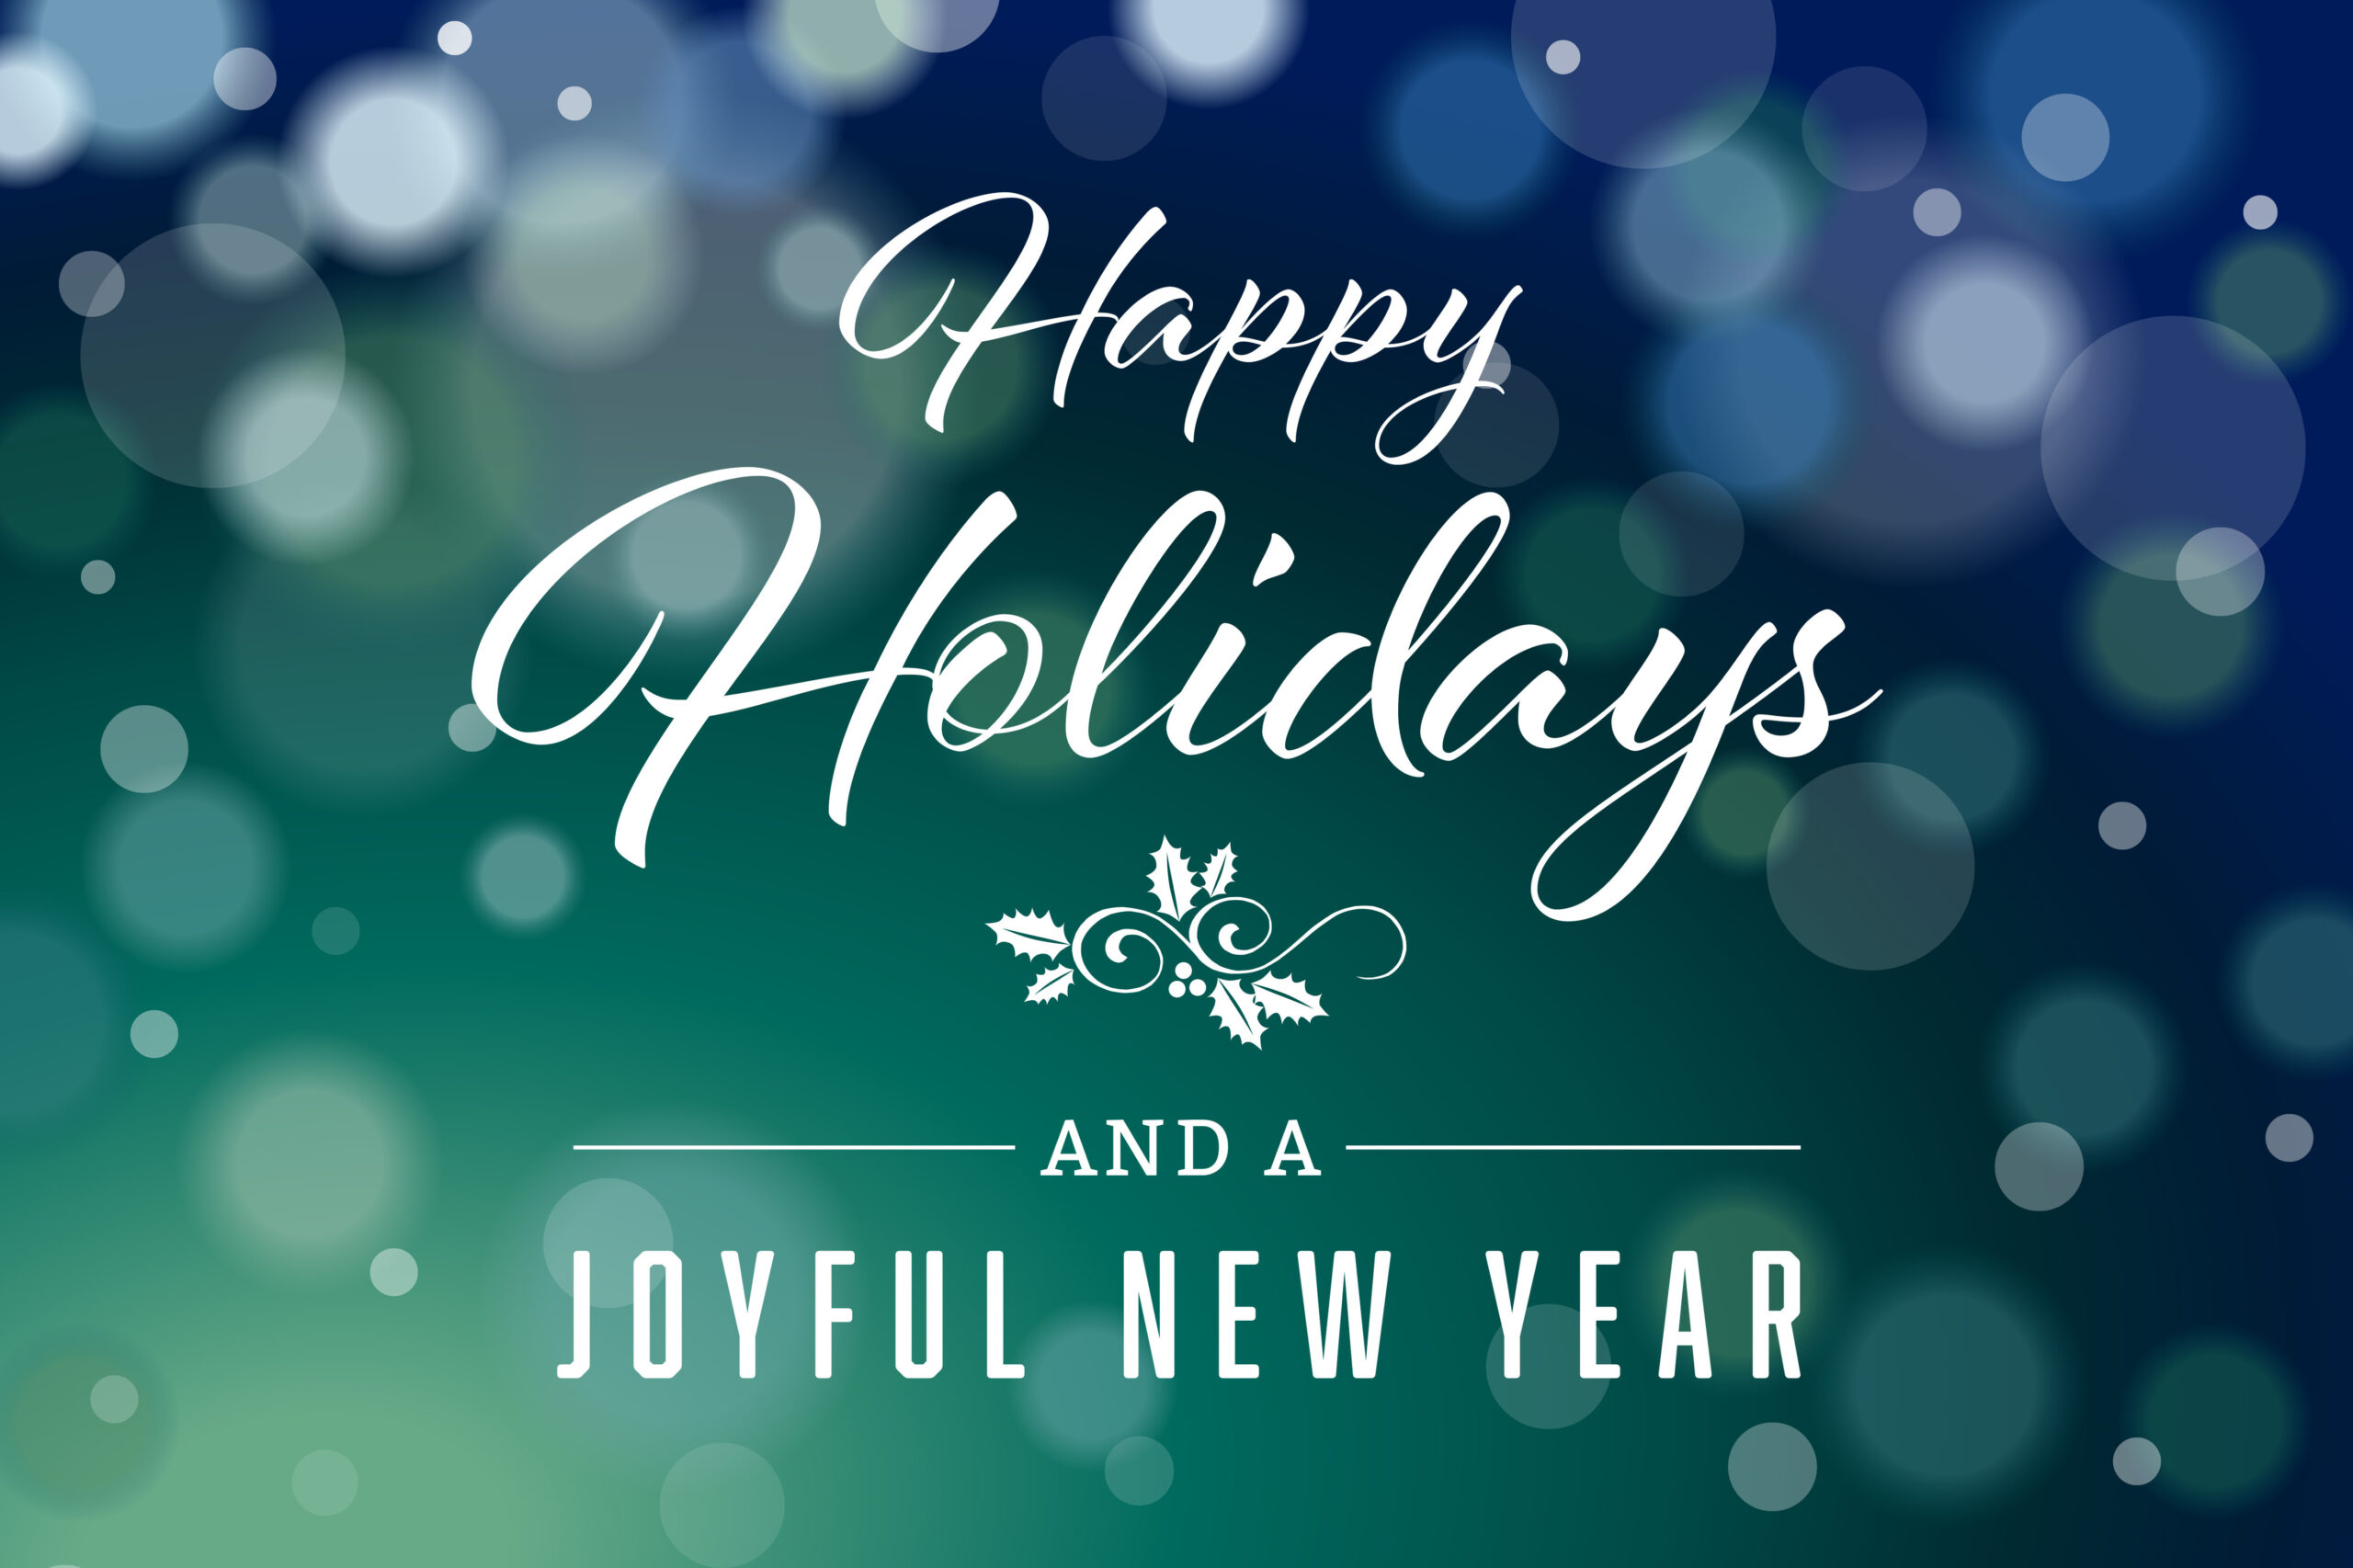 Edge Orthodontics wants to take a moment to wish you and your loved ones a joyous and memorable celebration.